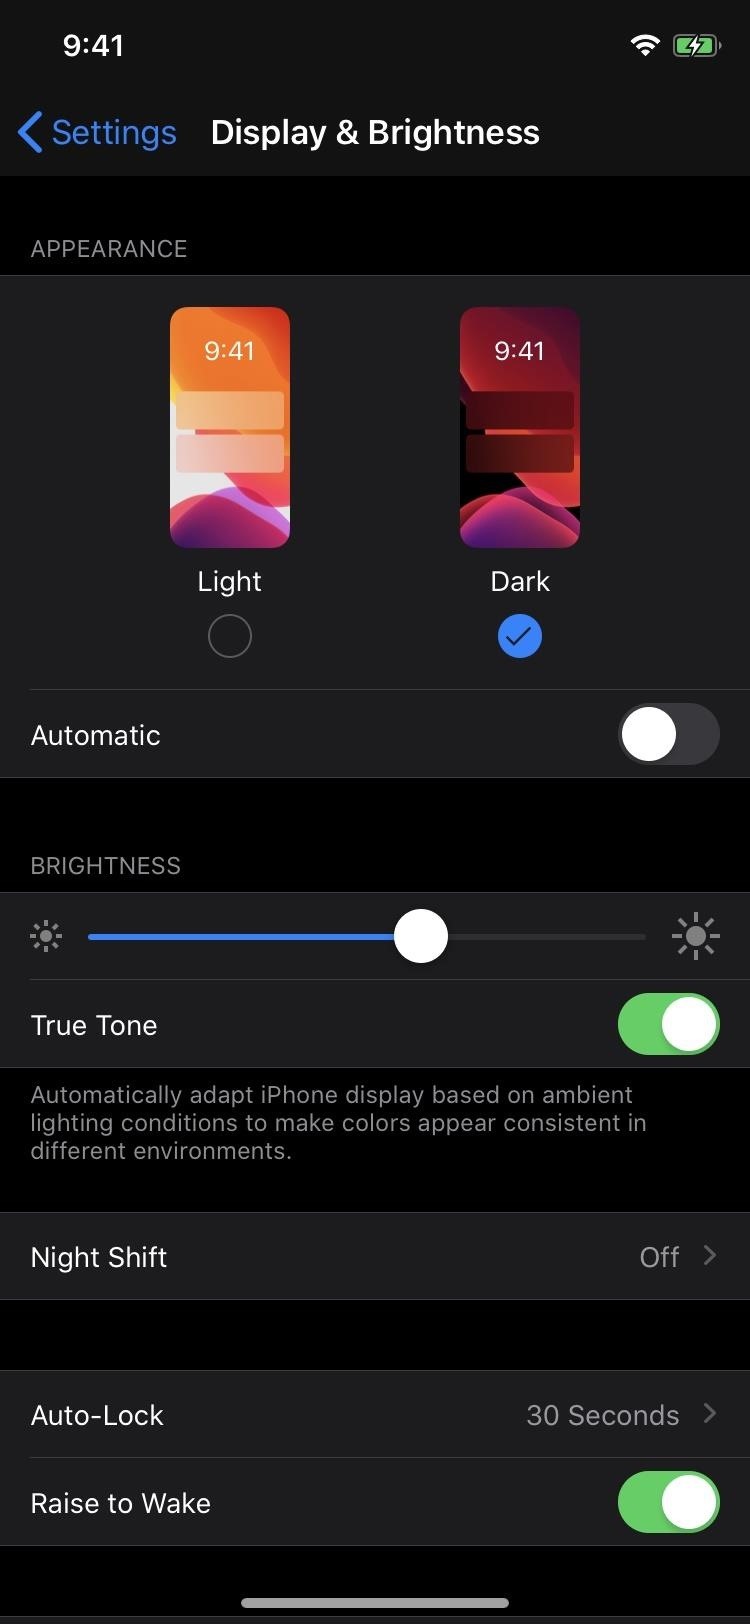 How to Enable Apple's True Dark Mode in iOS 13 for iPhone